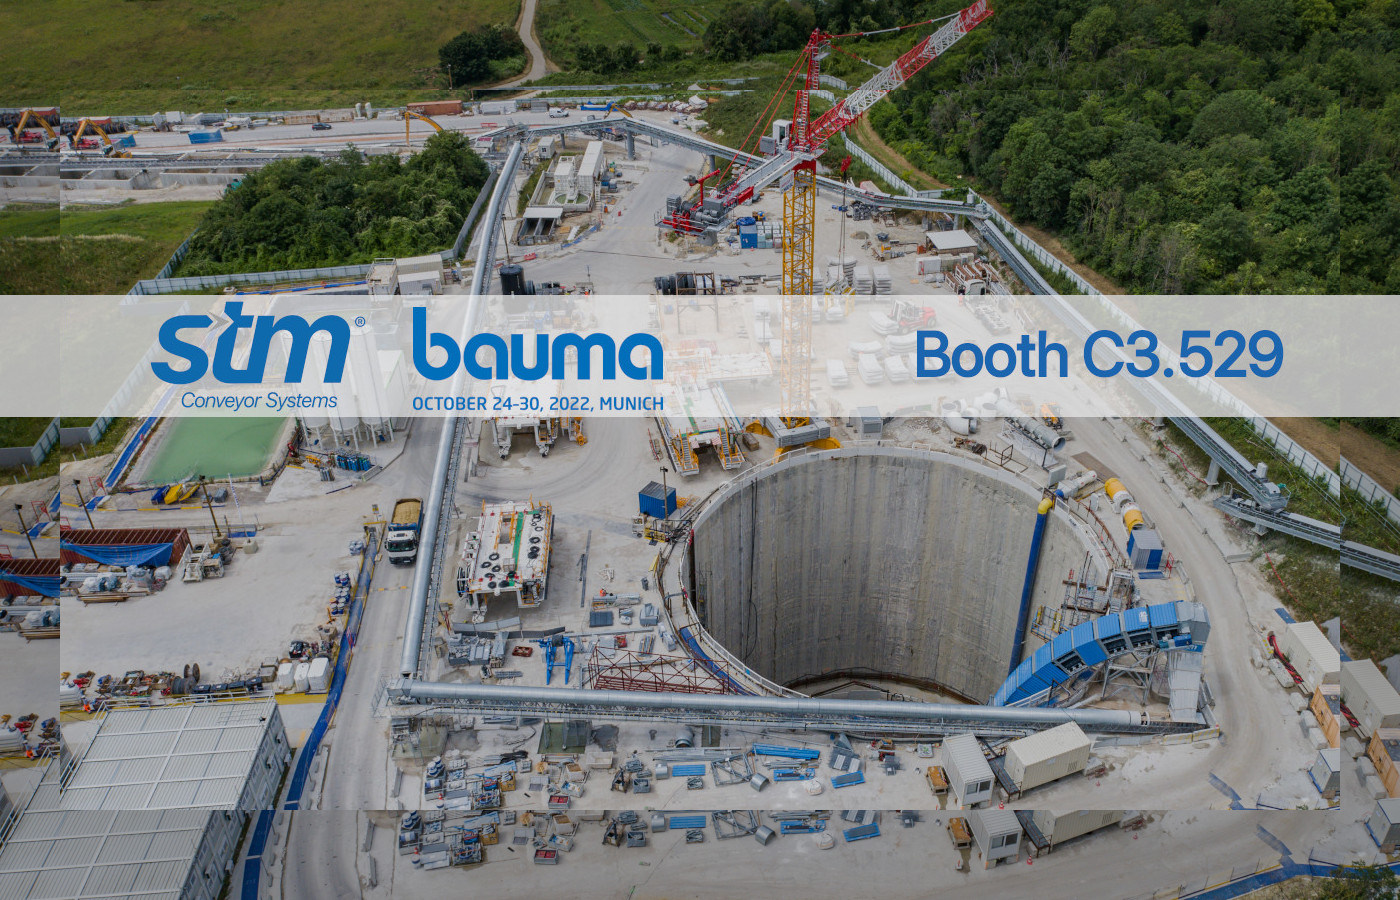 STM is exhibiting at BAUMA 2022!